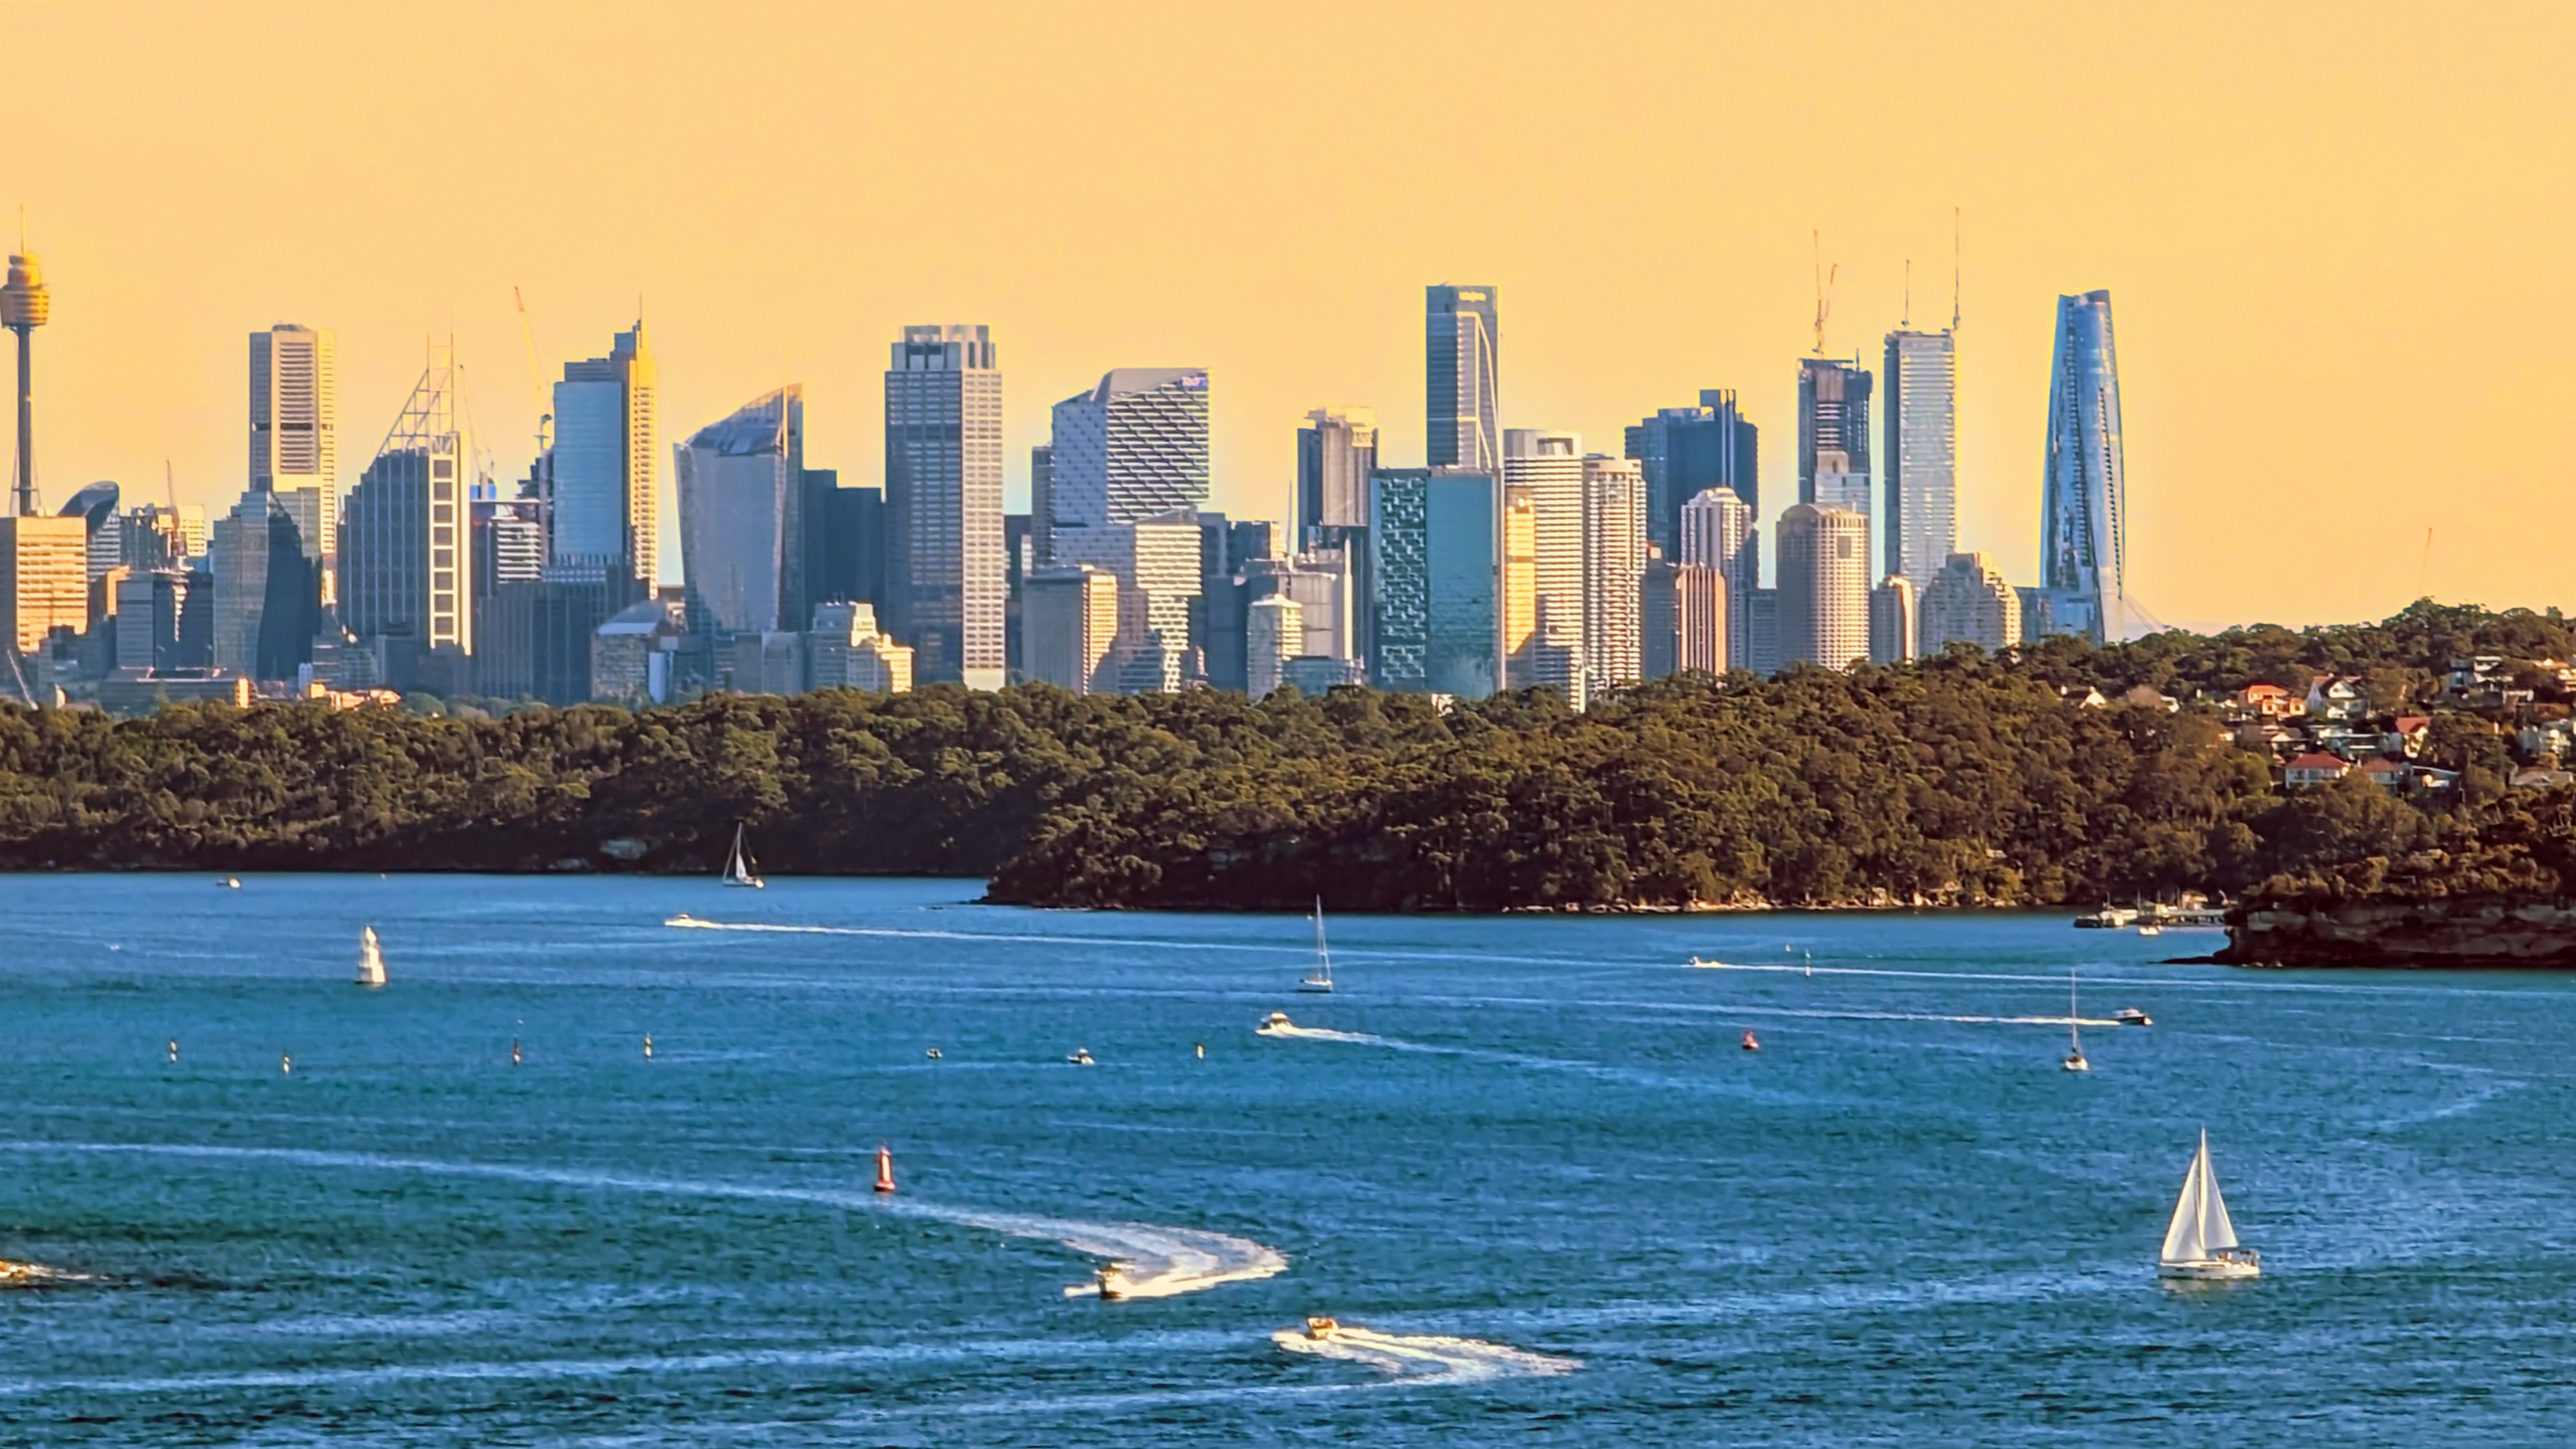 Edited landscape photo of Sydney Harbour with the city a false yellow sky, CBD tower blocks, and boats on the water.